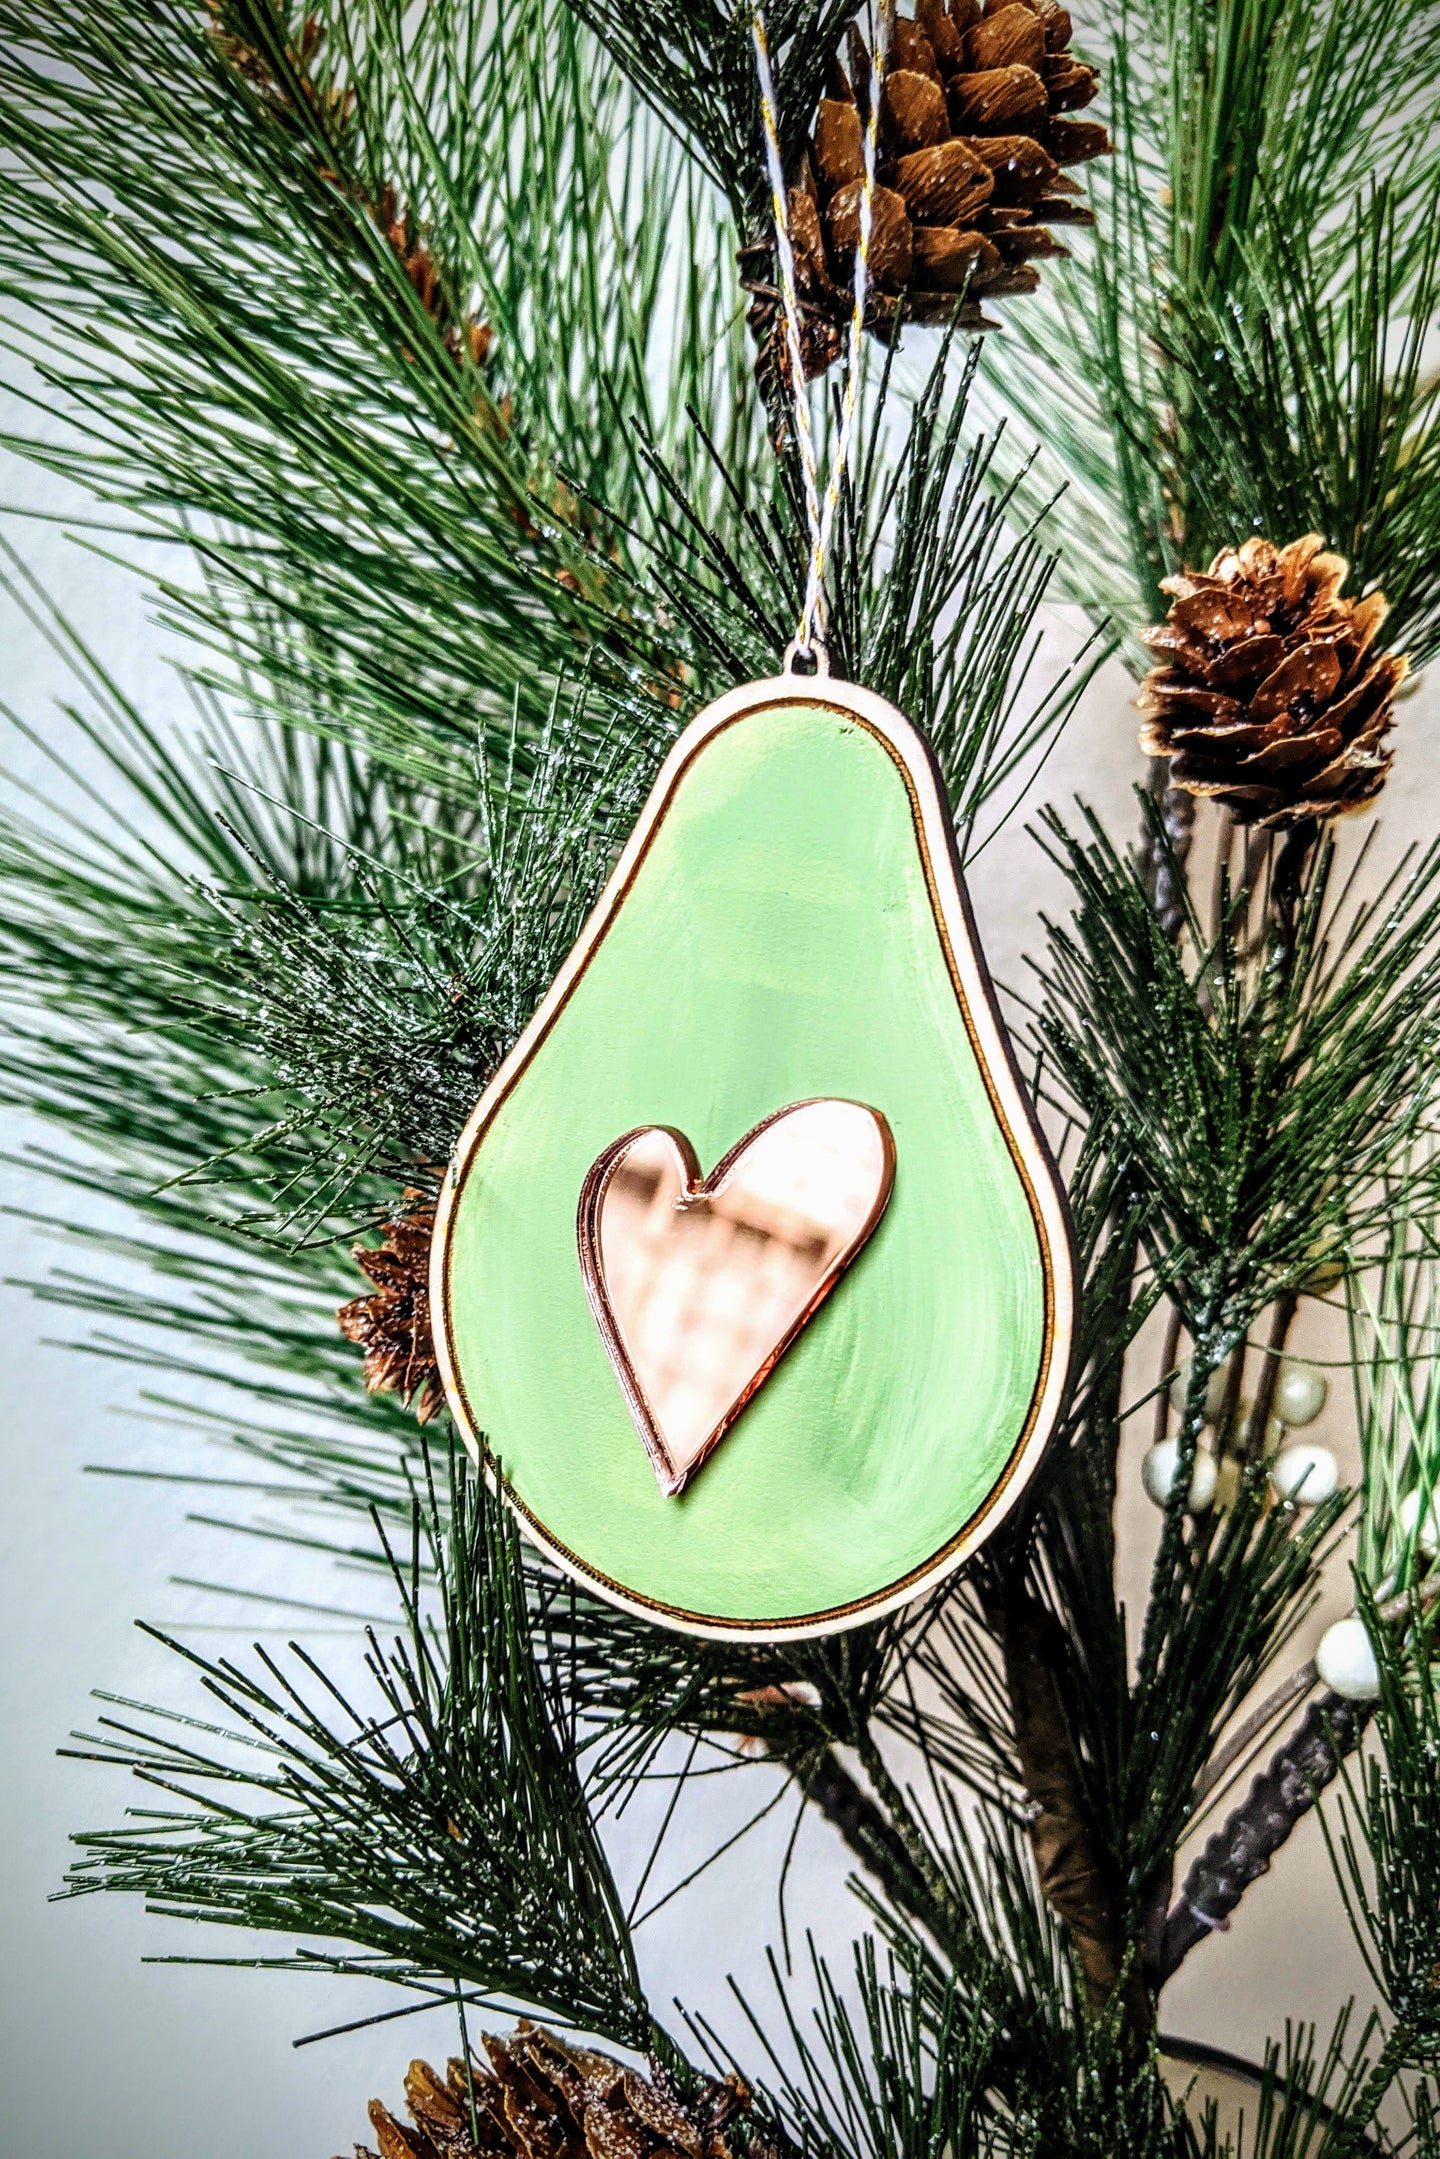 Avocado Christmas Ornament made from Birch Plywood with a mirrored pink acrylic heart as the pit